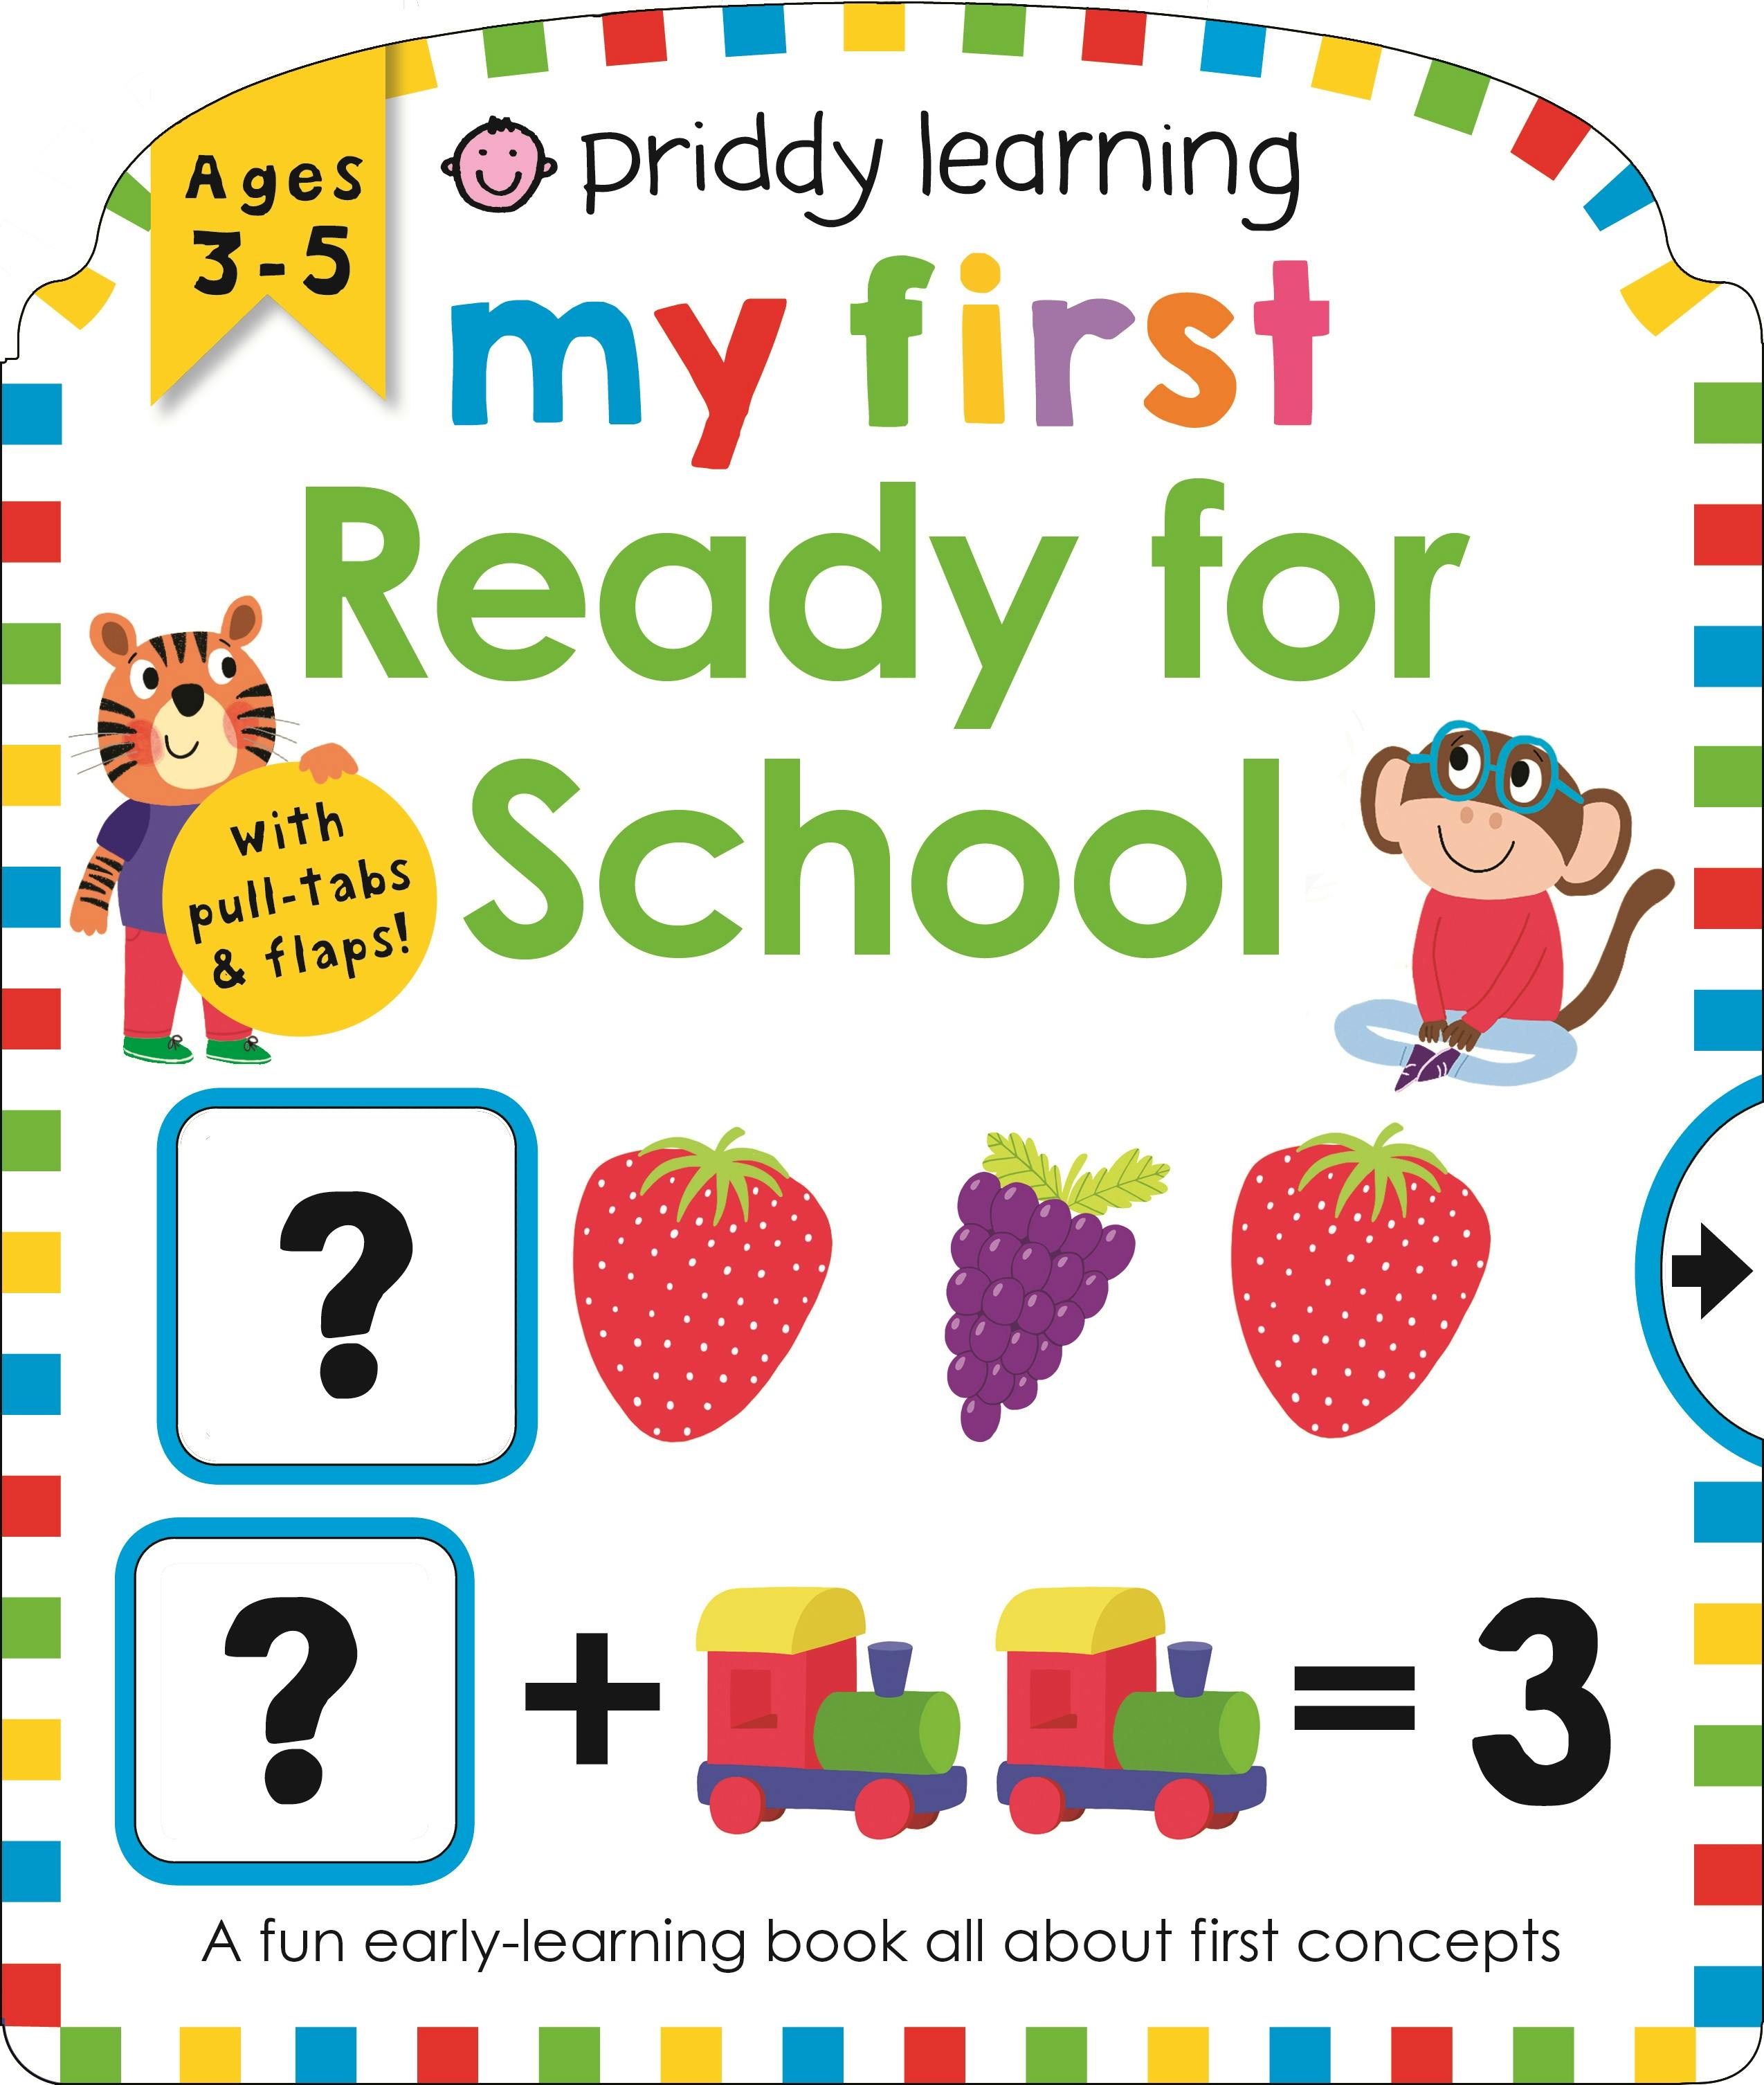 Ready for first. Ready for first book. Priddy r. "first 100 numbers".